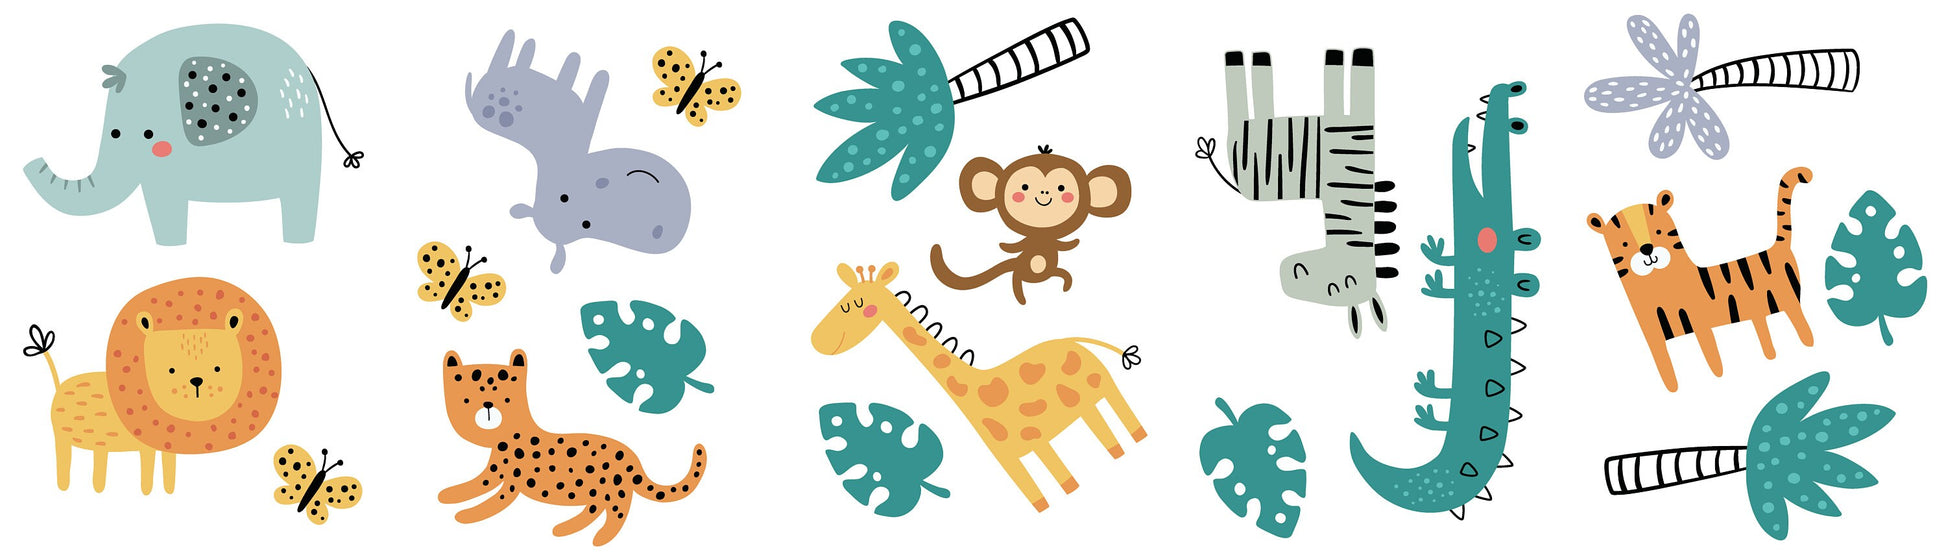 Safari Animals Wall Decal Stickers For Kids Nursery Rooms